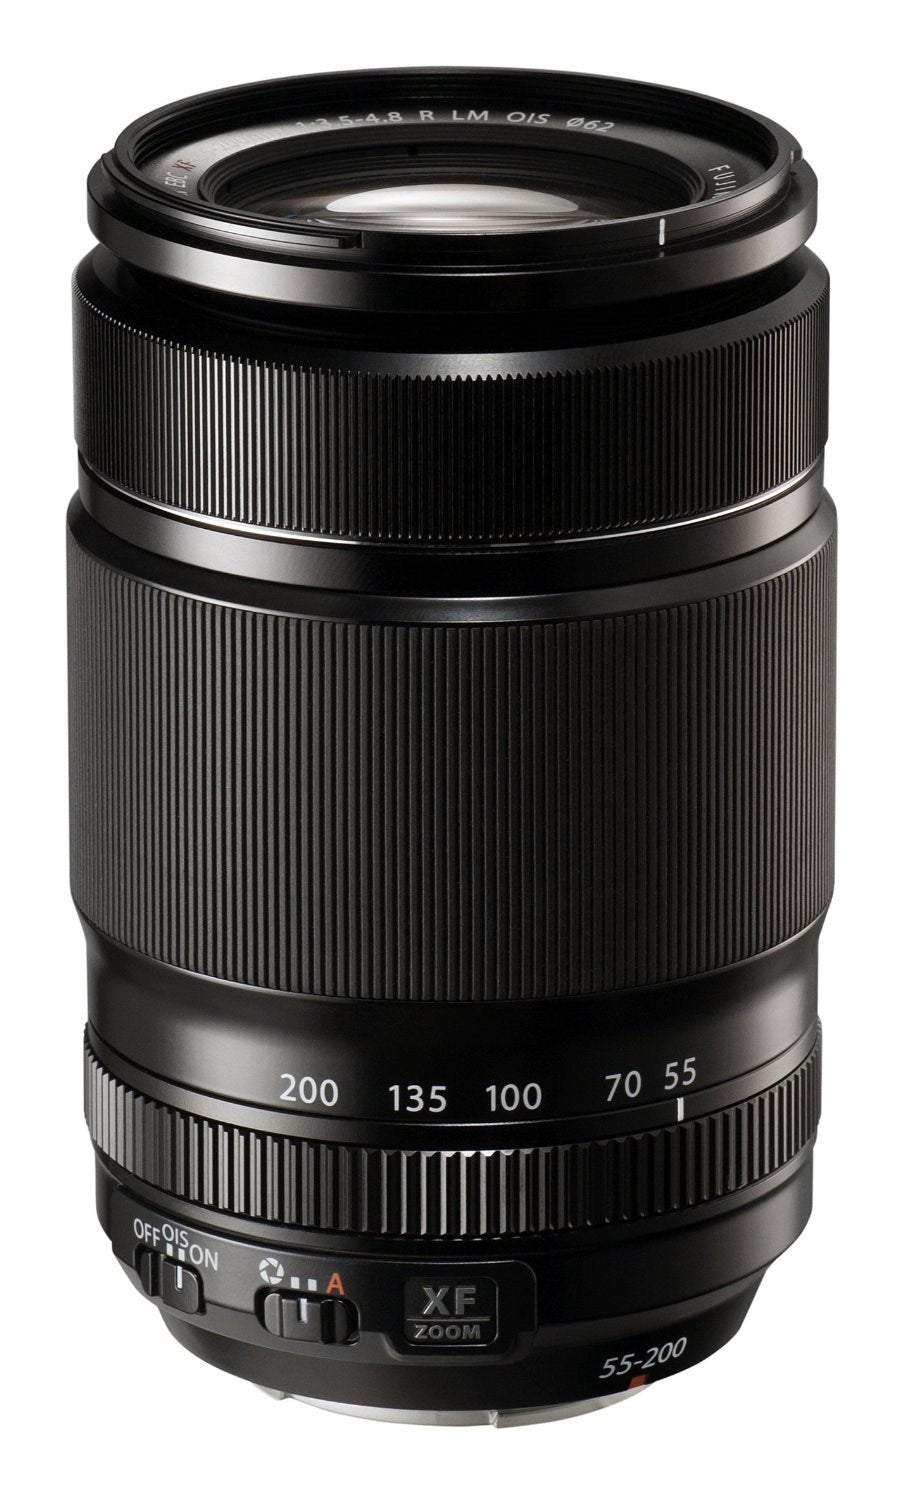 Product Image of Fujifilm XF 55-200mm f3.5-4.8 R LM OIS Lens